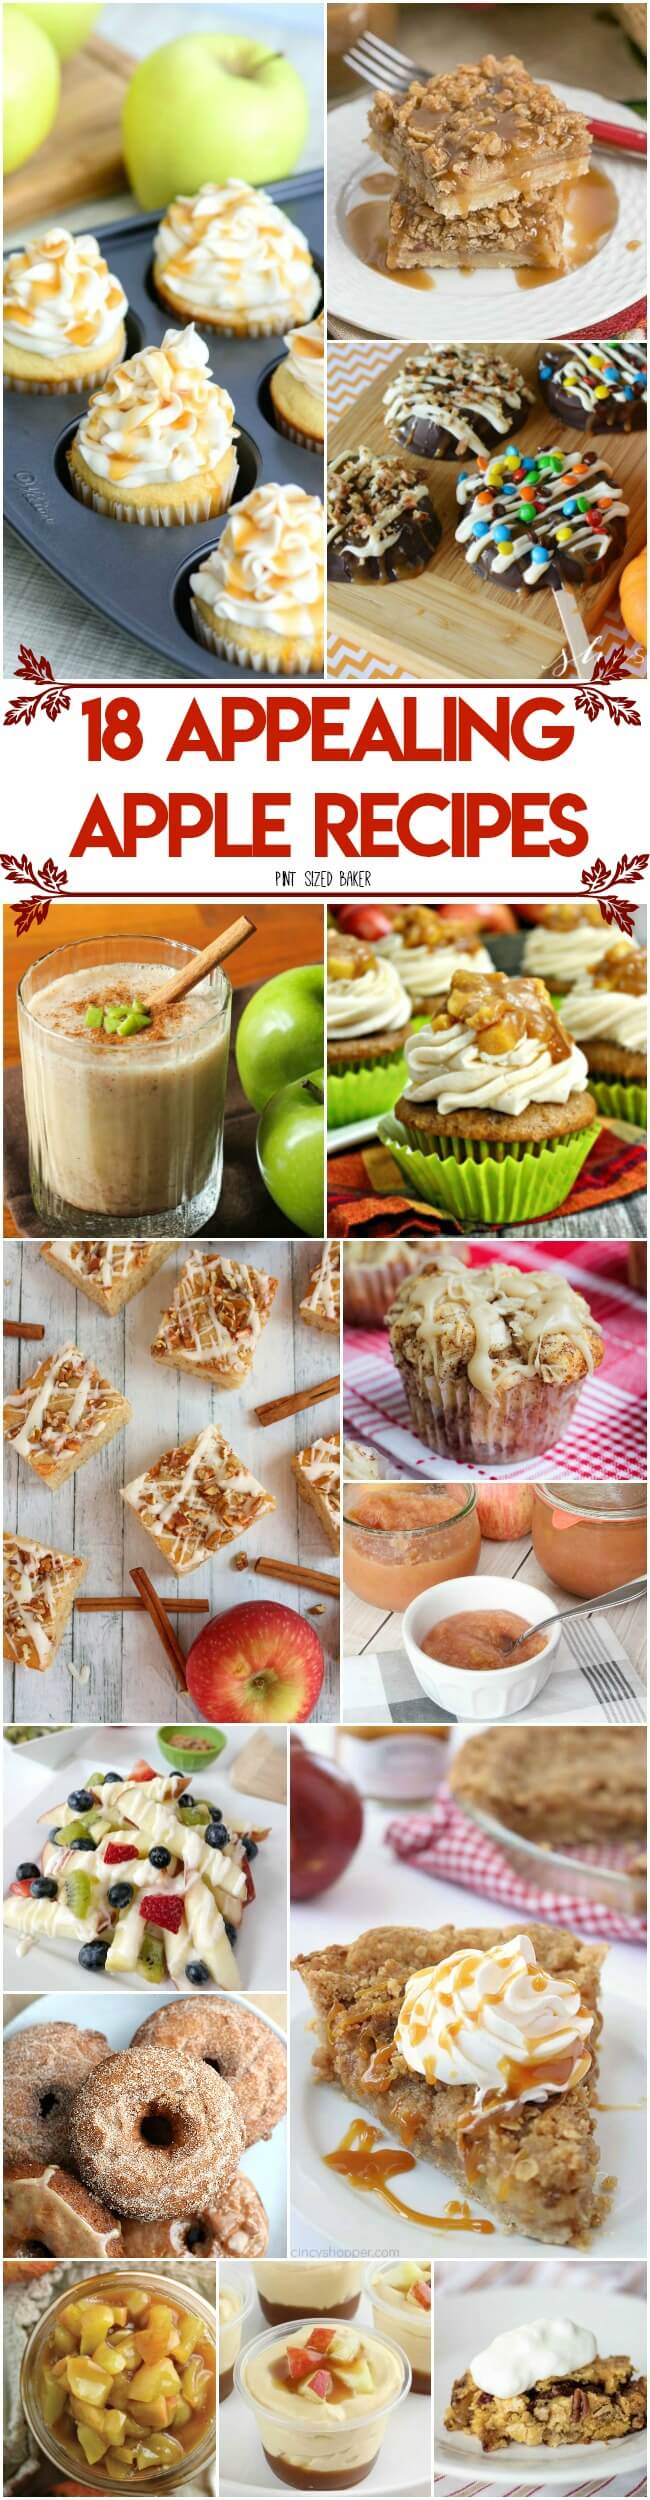  It's just the best afternoon snack! YUM! Don't be basic with your PSL, bake up some of these 18 Appealing Apple Recipes that are sure to get you into the Autumn mood.